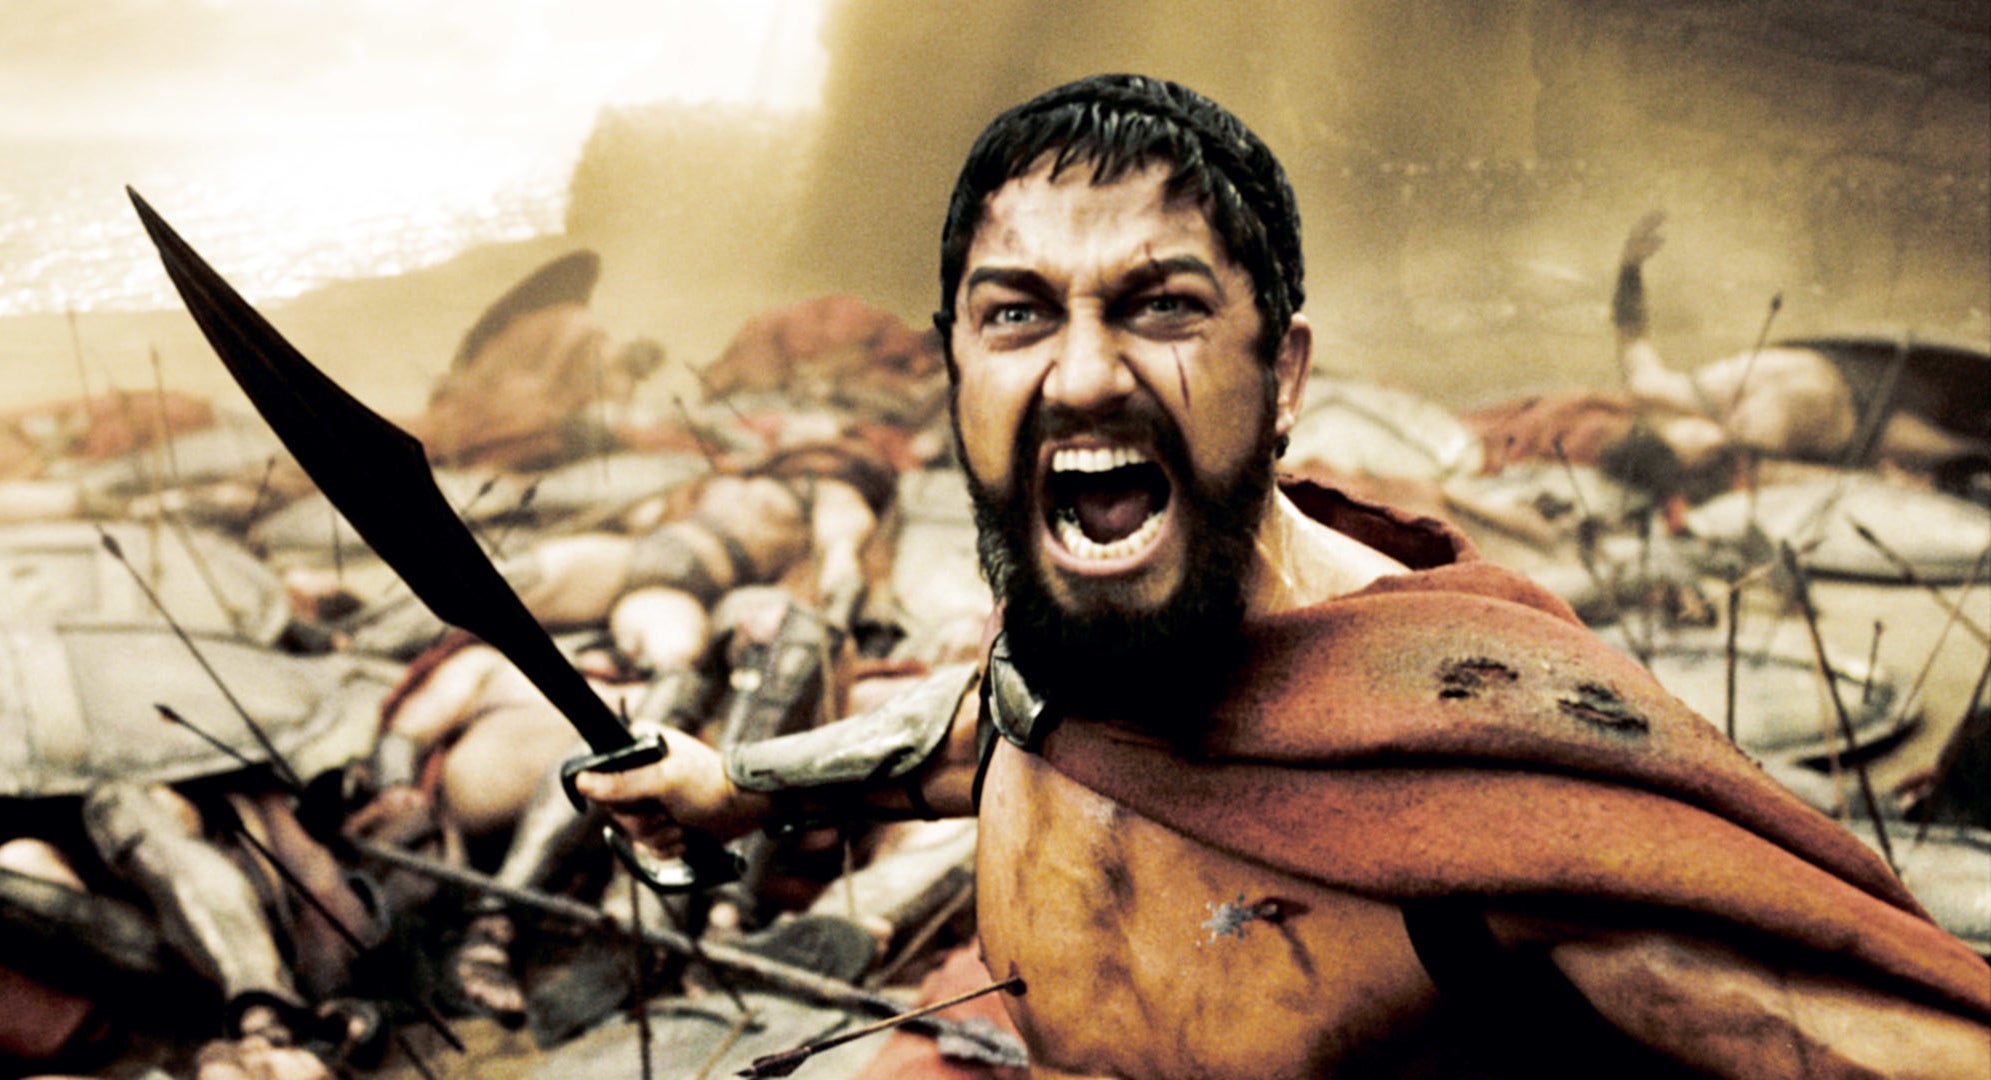 Gerard Butler in 300 holding a large knife and looking fierce